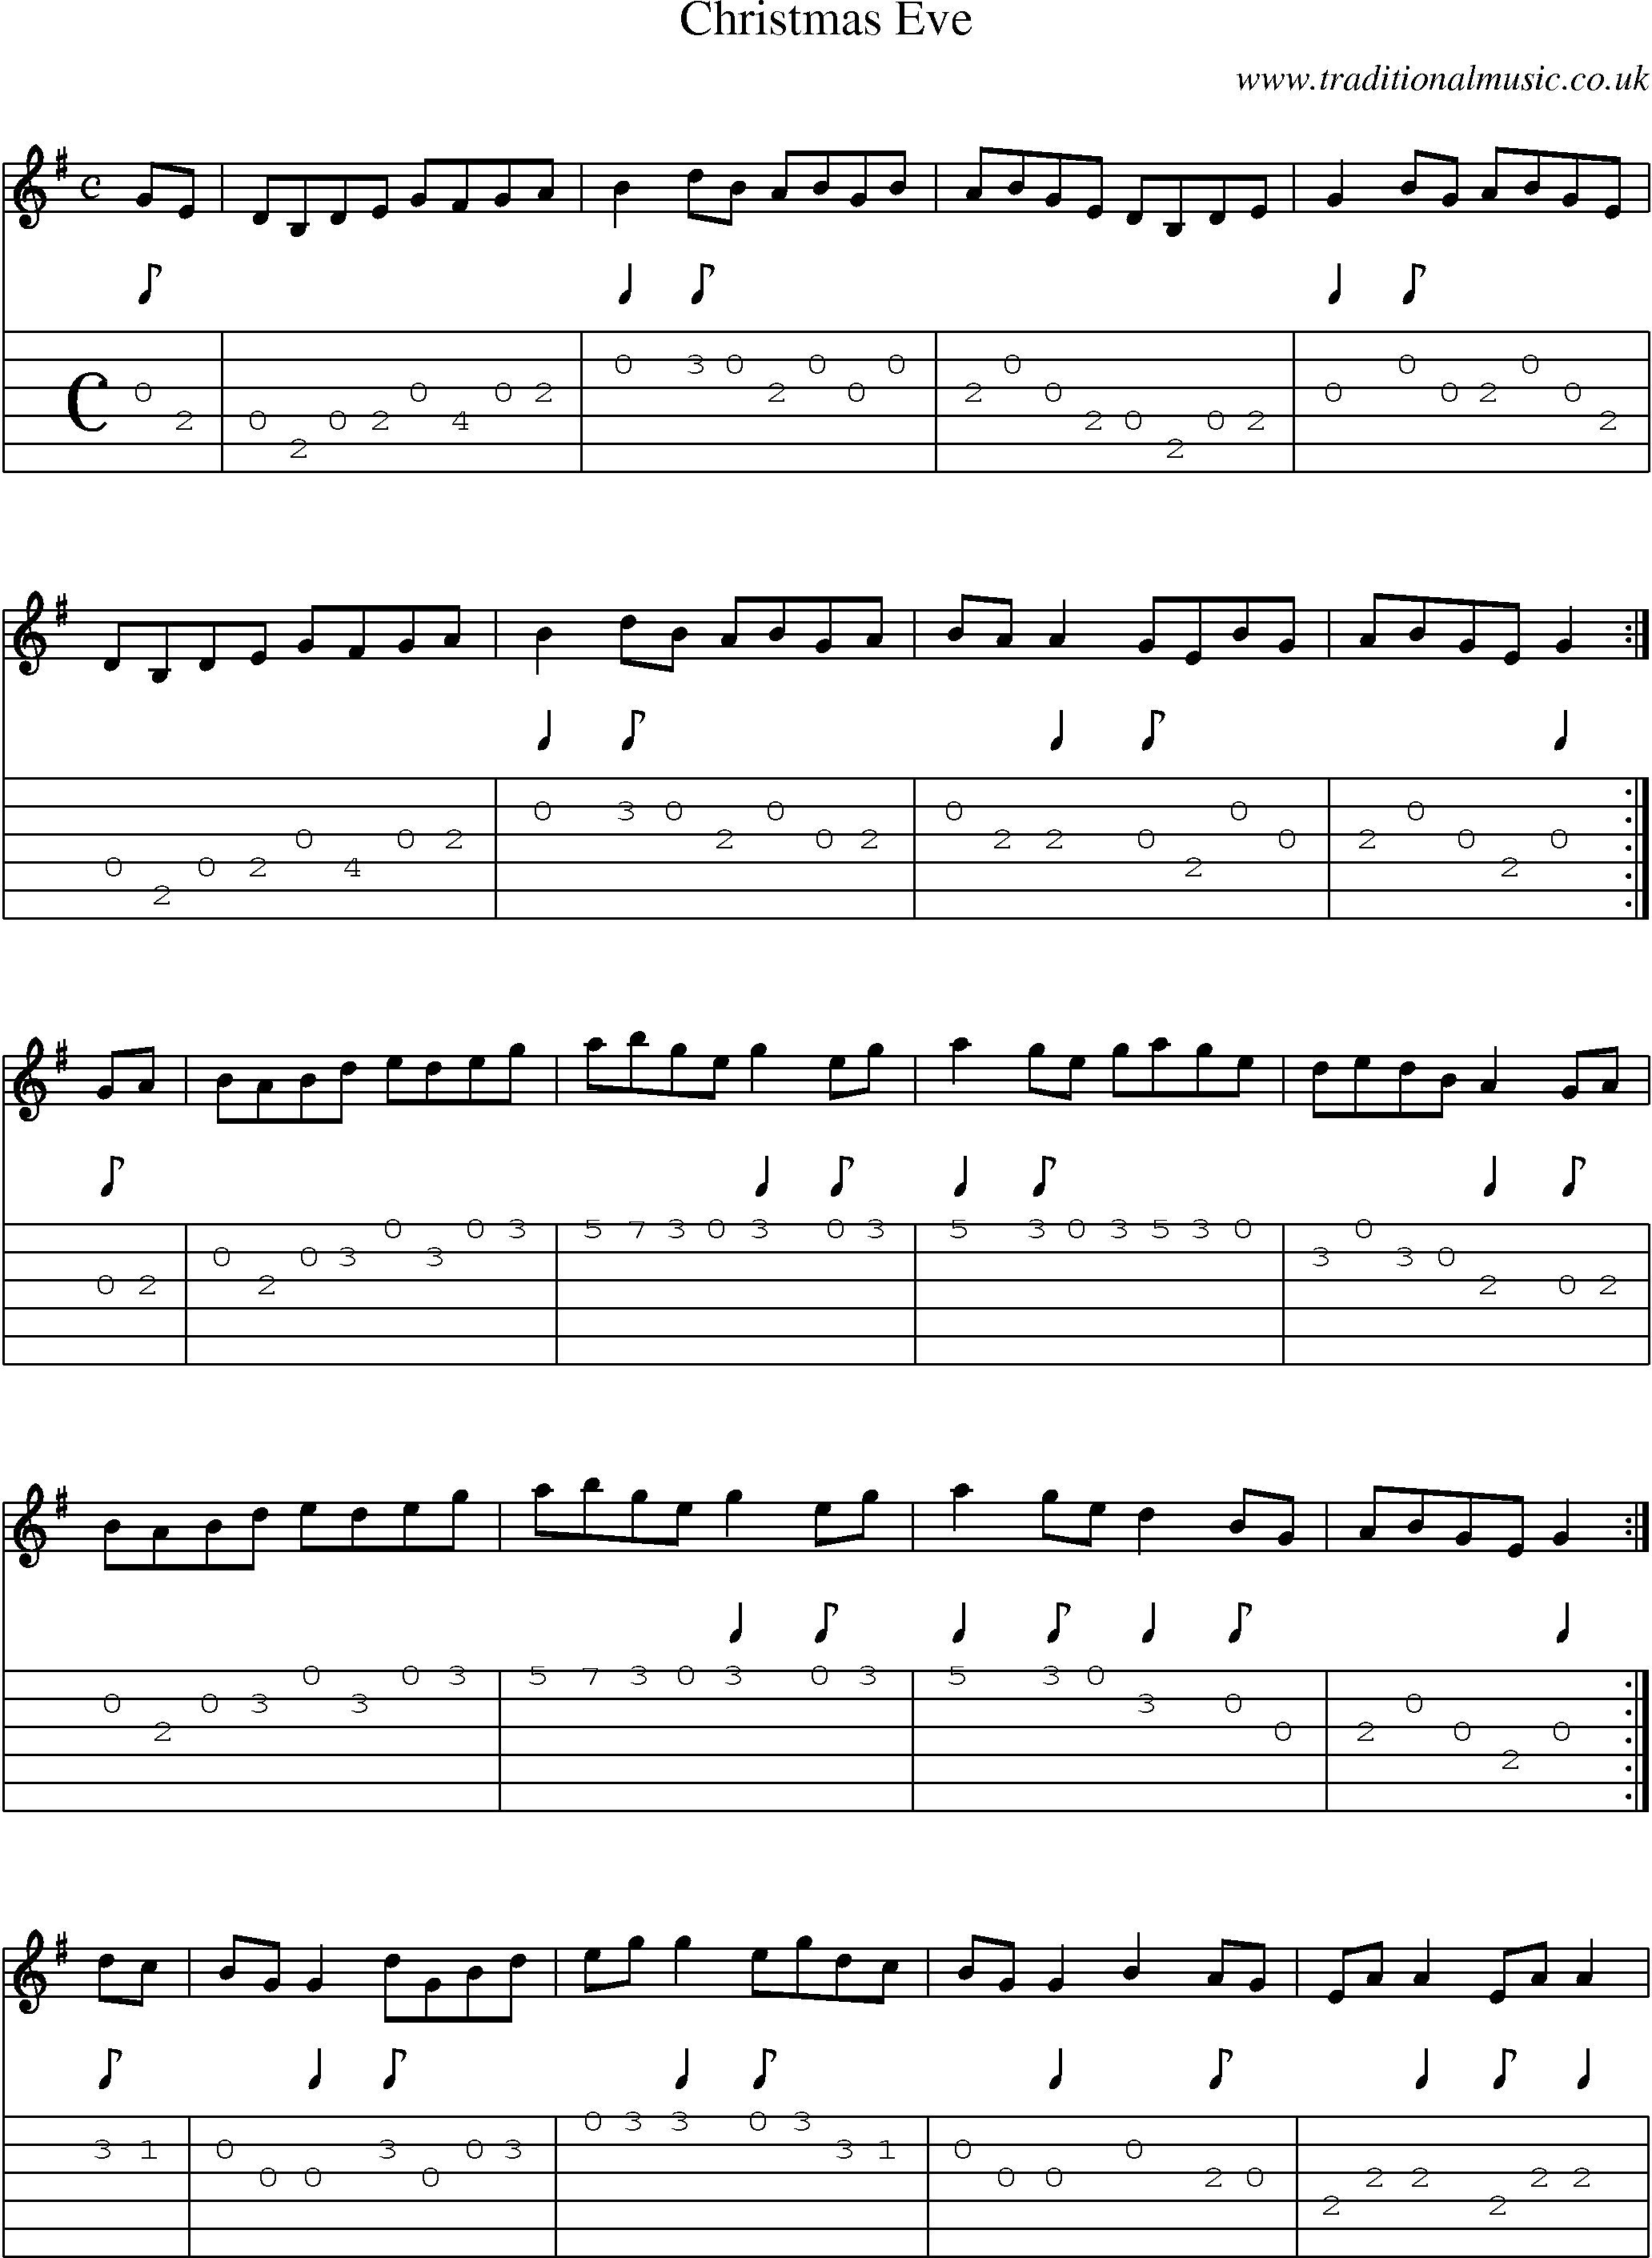 Music Score and Guitar Tabs for Christmas Eve